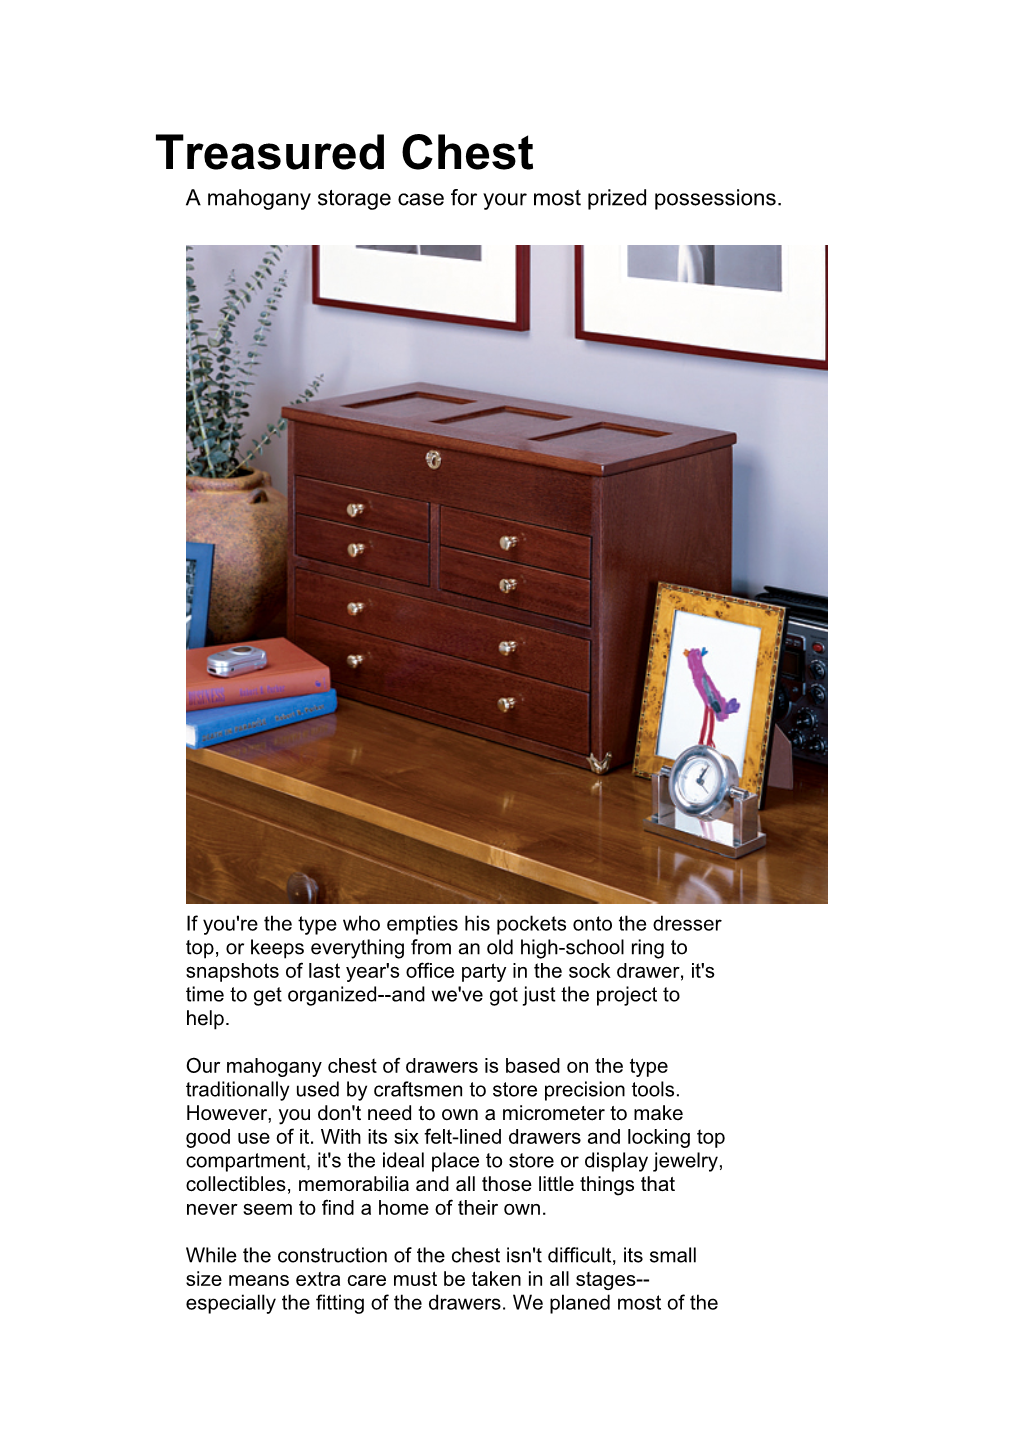 Treasured Chest a Mahogany Storage Case for Your Most Prized Possessions